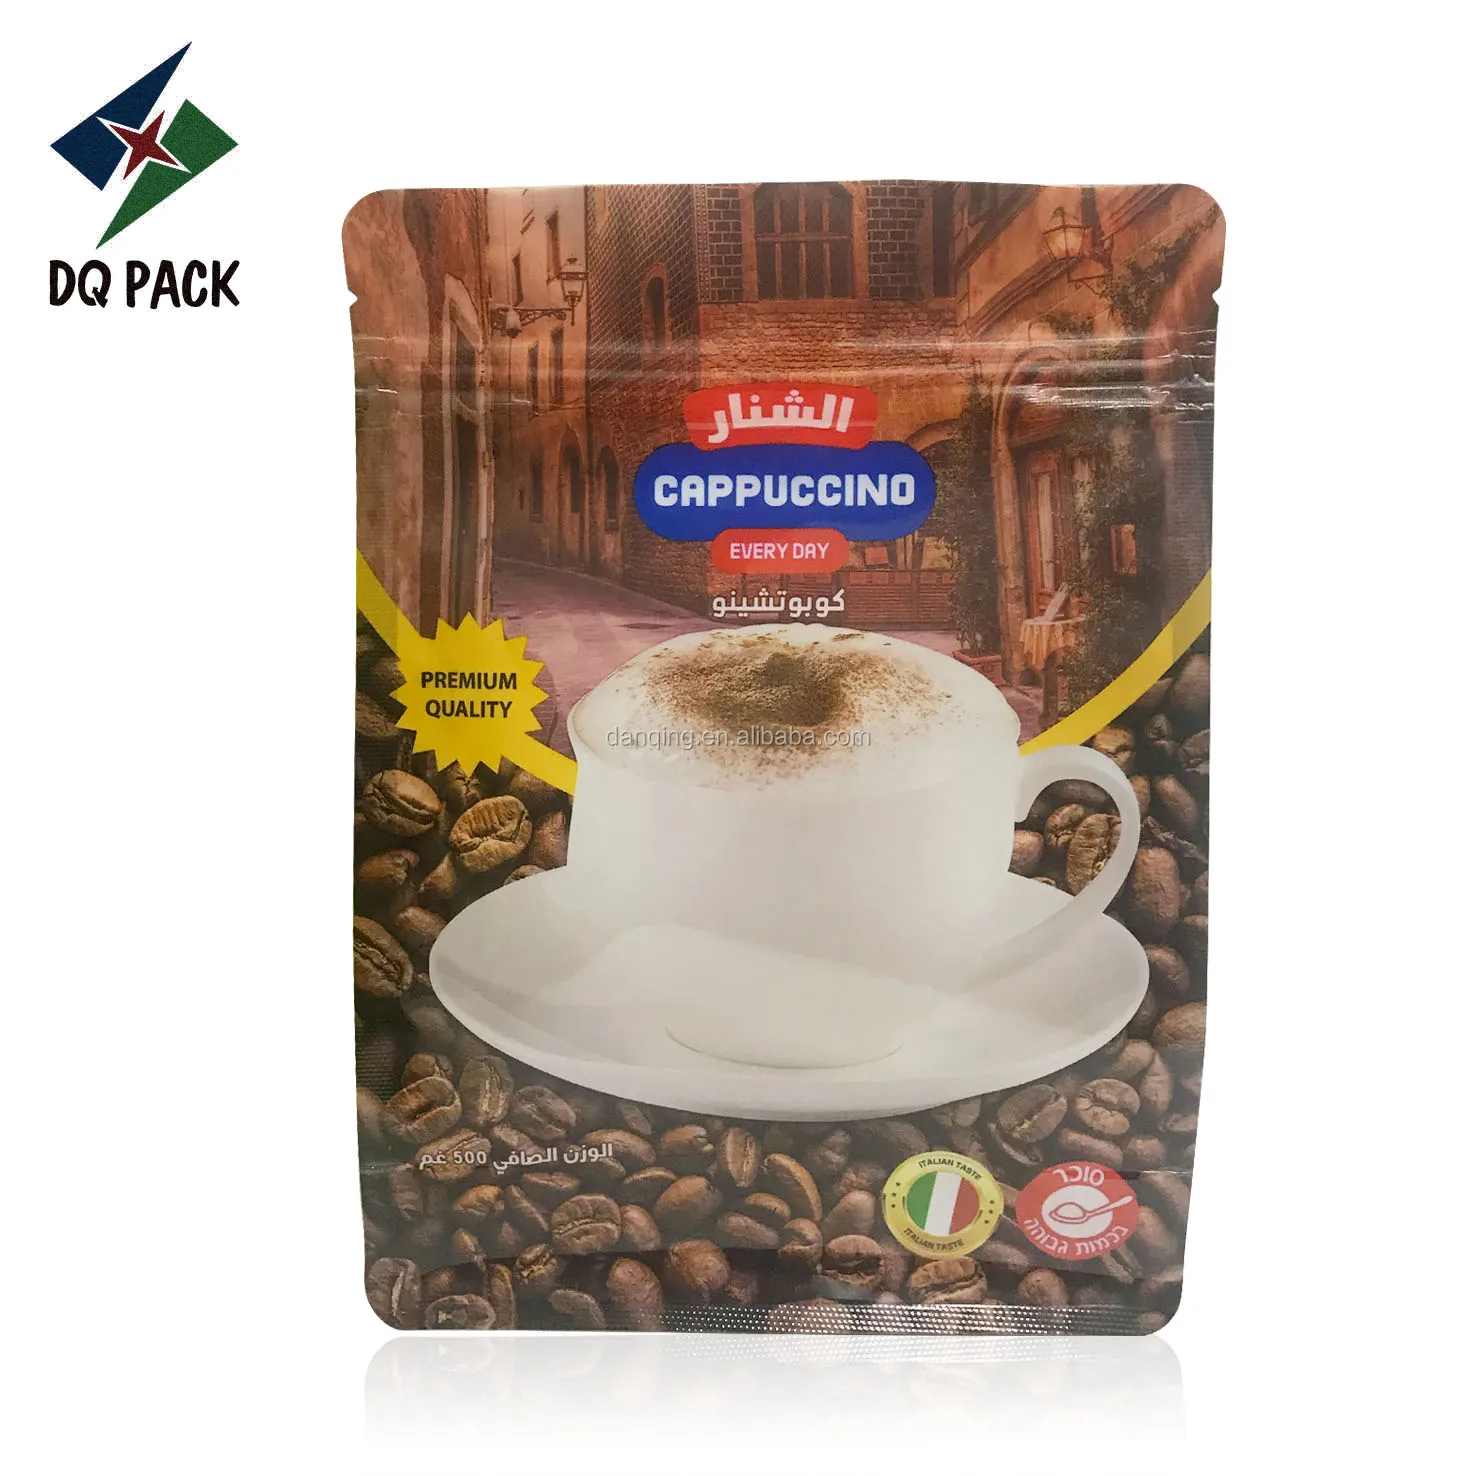 DQ PACK Plastic Coffee Powder Pouch Flat Bottom Pouch With Zipper